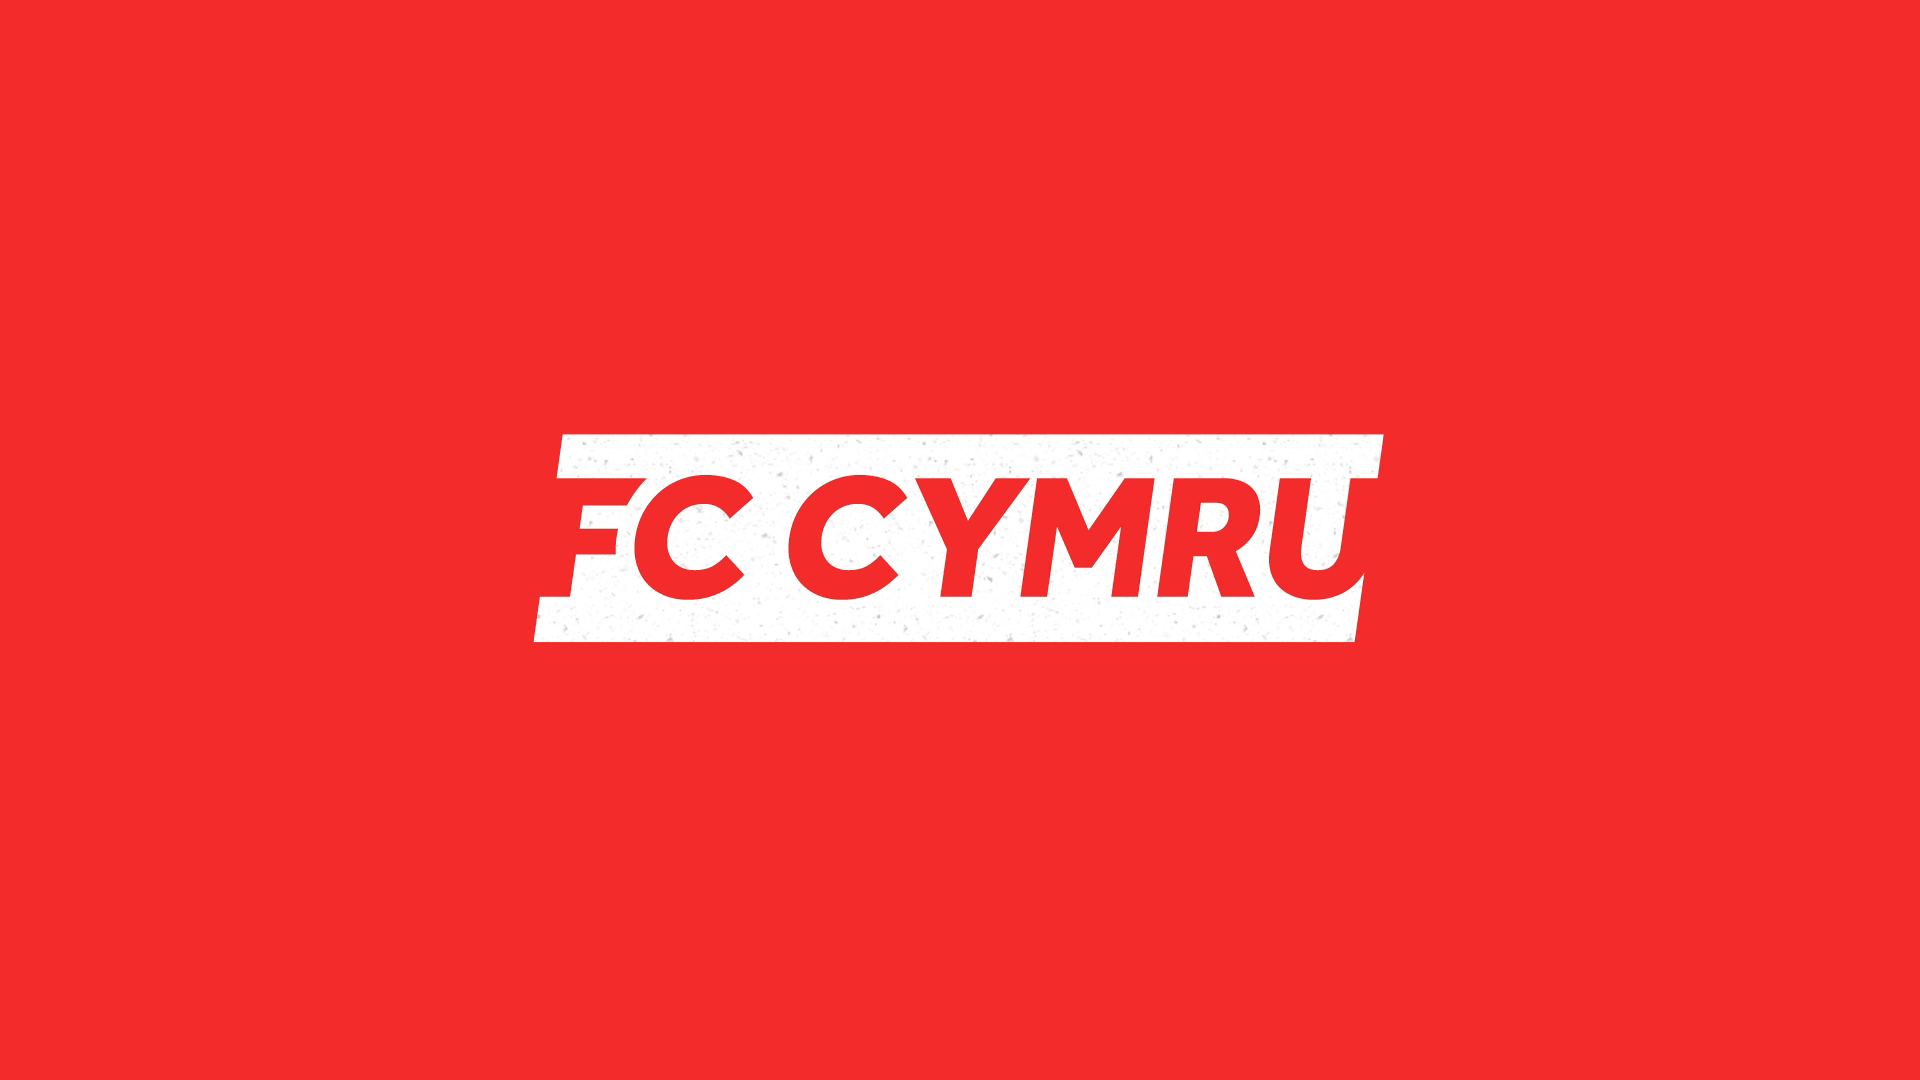 FC CYMRU - EURO 2020 Tour - The End of the Road